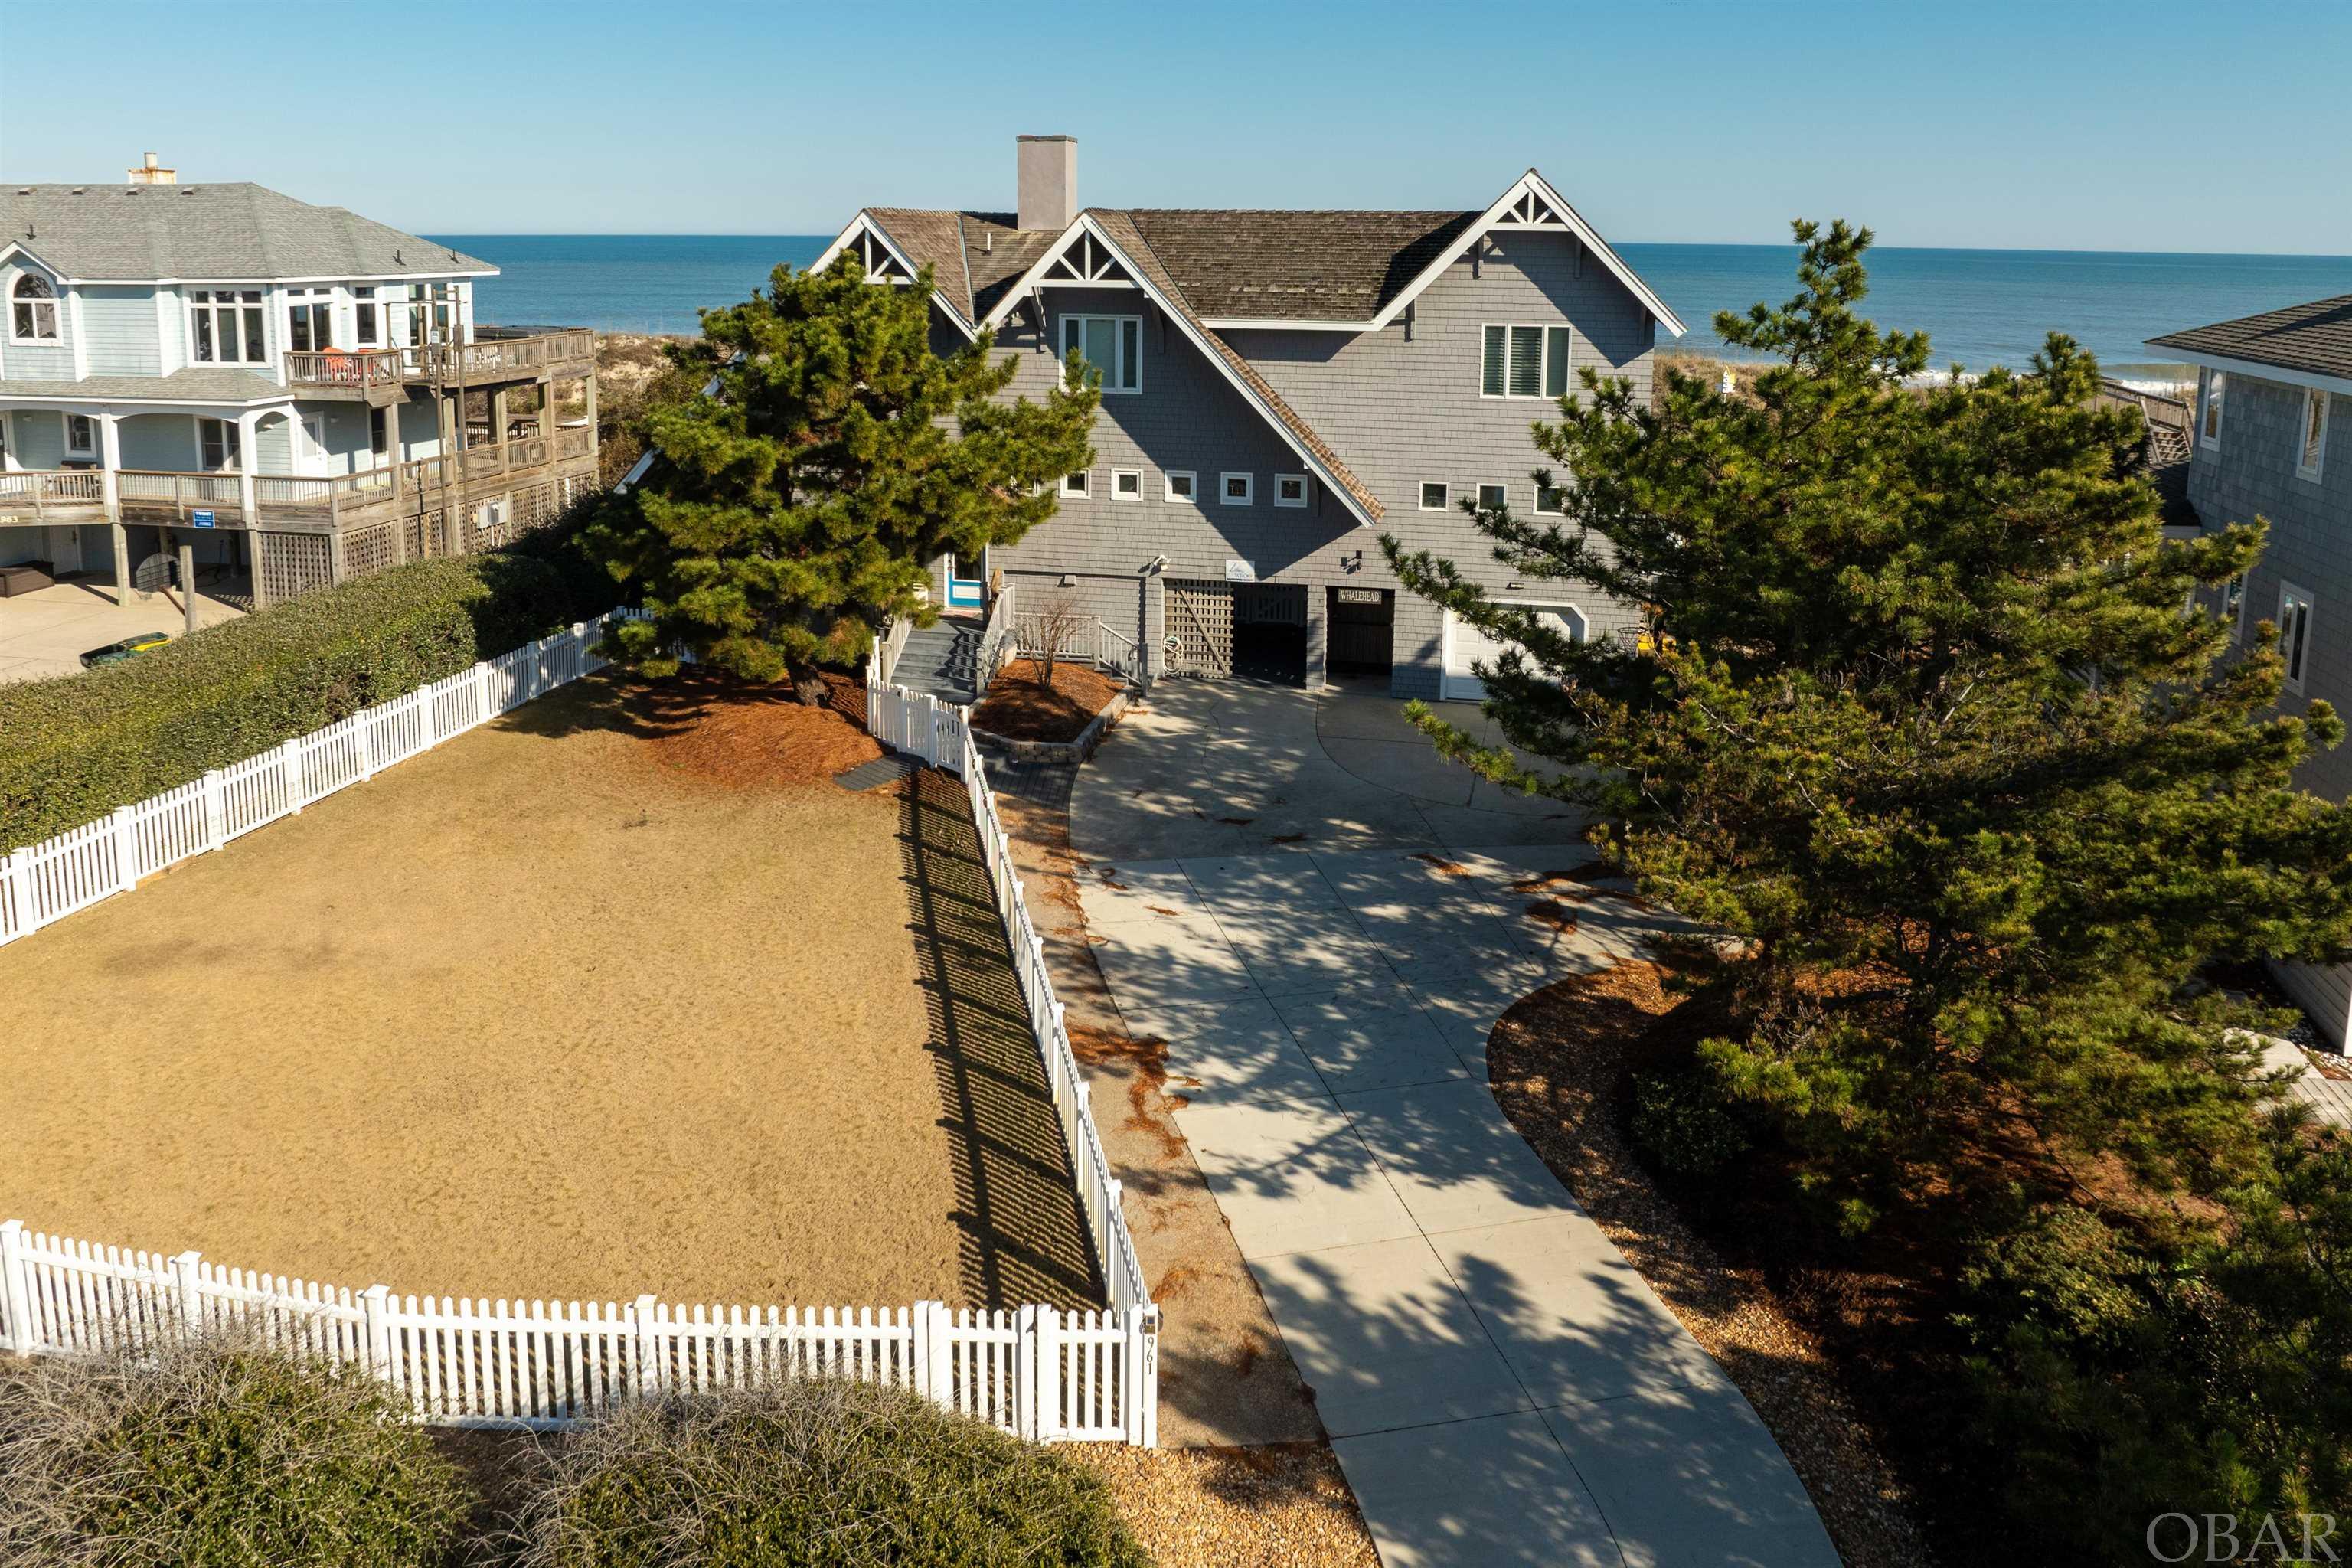 Oceanfront living is the best here in this one-of-a-kind home.  It is distinctive from the moment it greets you with its shingled siding, shingled roof and white picket fence front yard.  Built in 1992 with an addition and remodeling completed in 2005, it offers the intimacy of a cottage, yet set within a sprawling amount of space.  Breakers View has been gently used by numerous repeat renters and as a winter home for the sellers over the years.  All available weeks are rented!!   Meticulous detailing and care by the owner/builder.  Enter into the mid level to the the beautiful and window-lined living area with hardwood flooring and a gas fireplace. This leads into the thoughtfully designed kitchen with ocean view, a generous amount of counter space and is extremely well equipped has lovely wood cabinets, 3 sinks and 2 dishwashers. The kitchen leads to the splendid dining room with custom table seating for 14 and offers ocean views.  The main bedroom with en suite is located on this level as well. Off the kitchen is the screened porch, which leads to sun deck, beach and pool.  The top level consists of 3 large bedrooms and 2 full baths.  All bedrooms are large, but one is massive and perfect for a young family. The ground level has luxury vinyl tile throughout. There is one bedroom here with 4 single beds and en suite bathroom and there is a den as well.  Outside you will find a covered & shuttered (a nod to the old Nags Head Casino) get-a-way lounge area, half bath and hot tub space for welcome break from the sun or continued enjoyment rain or shine.  The pool area is large with ample lounging space. A very private location & beach, in middle of block away from public walkways and luckily situated by 2 non-rentals to its South!  Truly a must-see & special home! A full garage is a bonus.  Owners have limited rentals to high season and offer at a low rate to their loyal guests - see rental projection for its likely possibility.